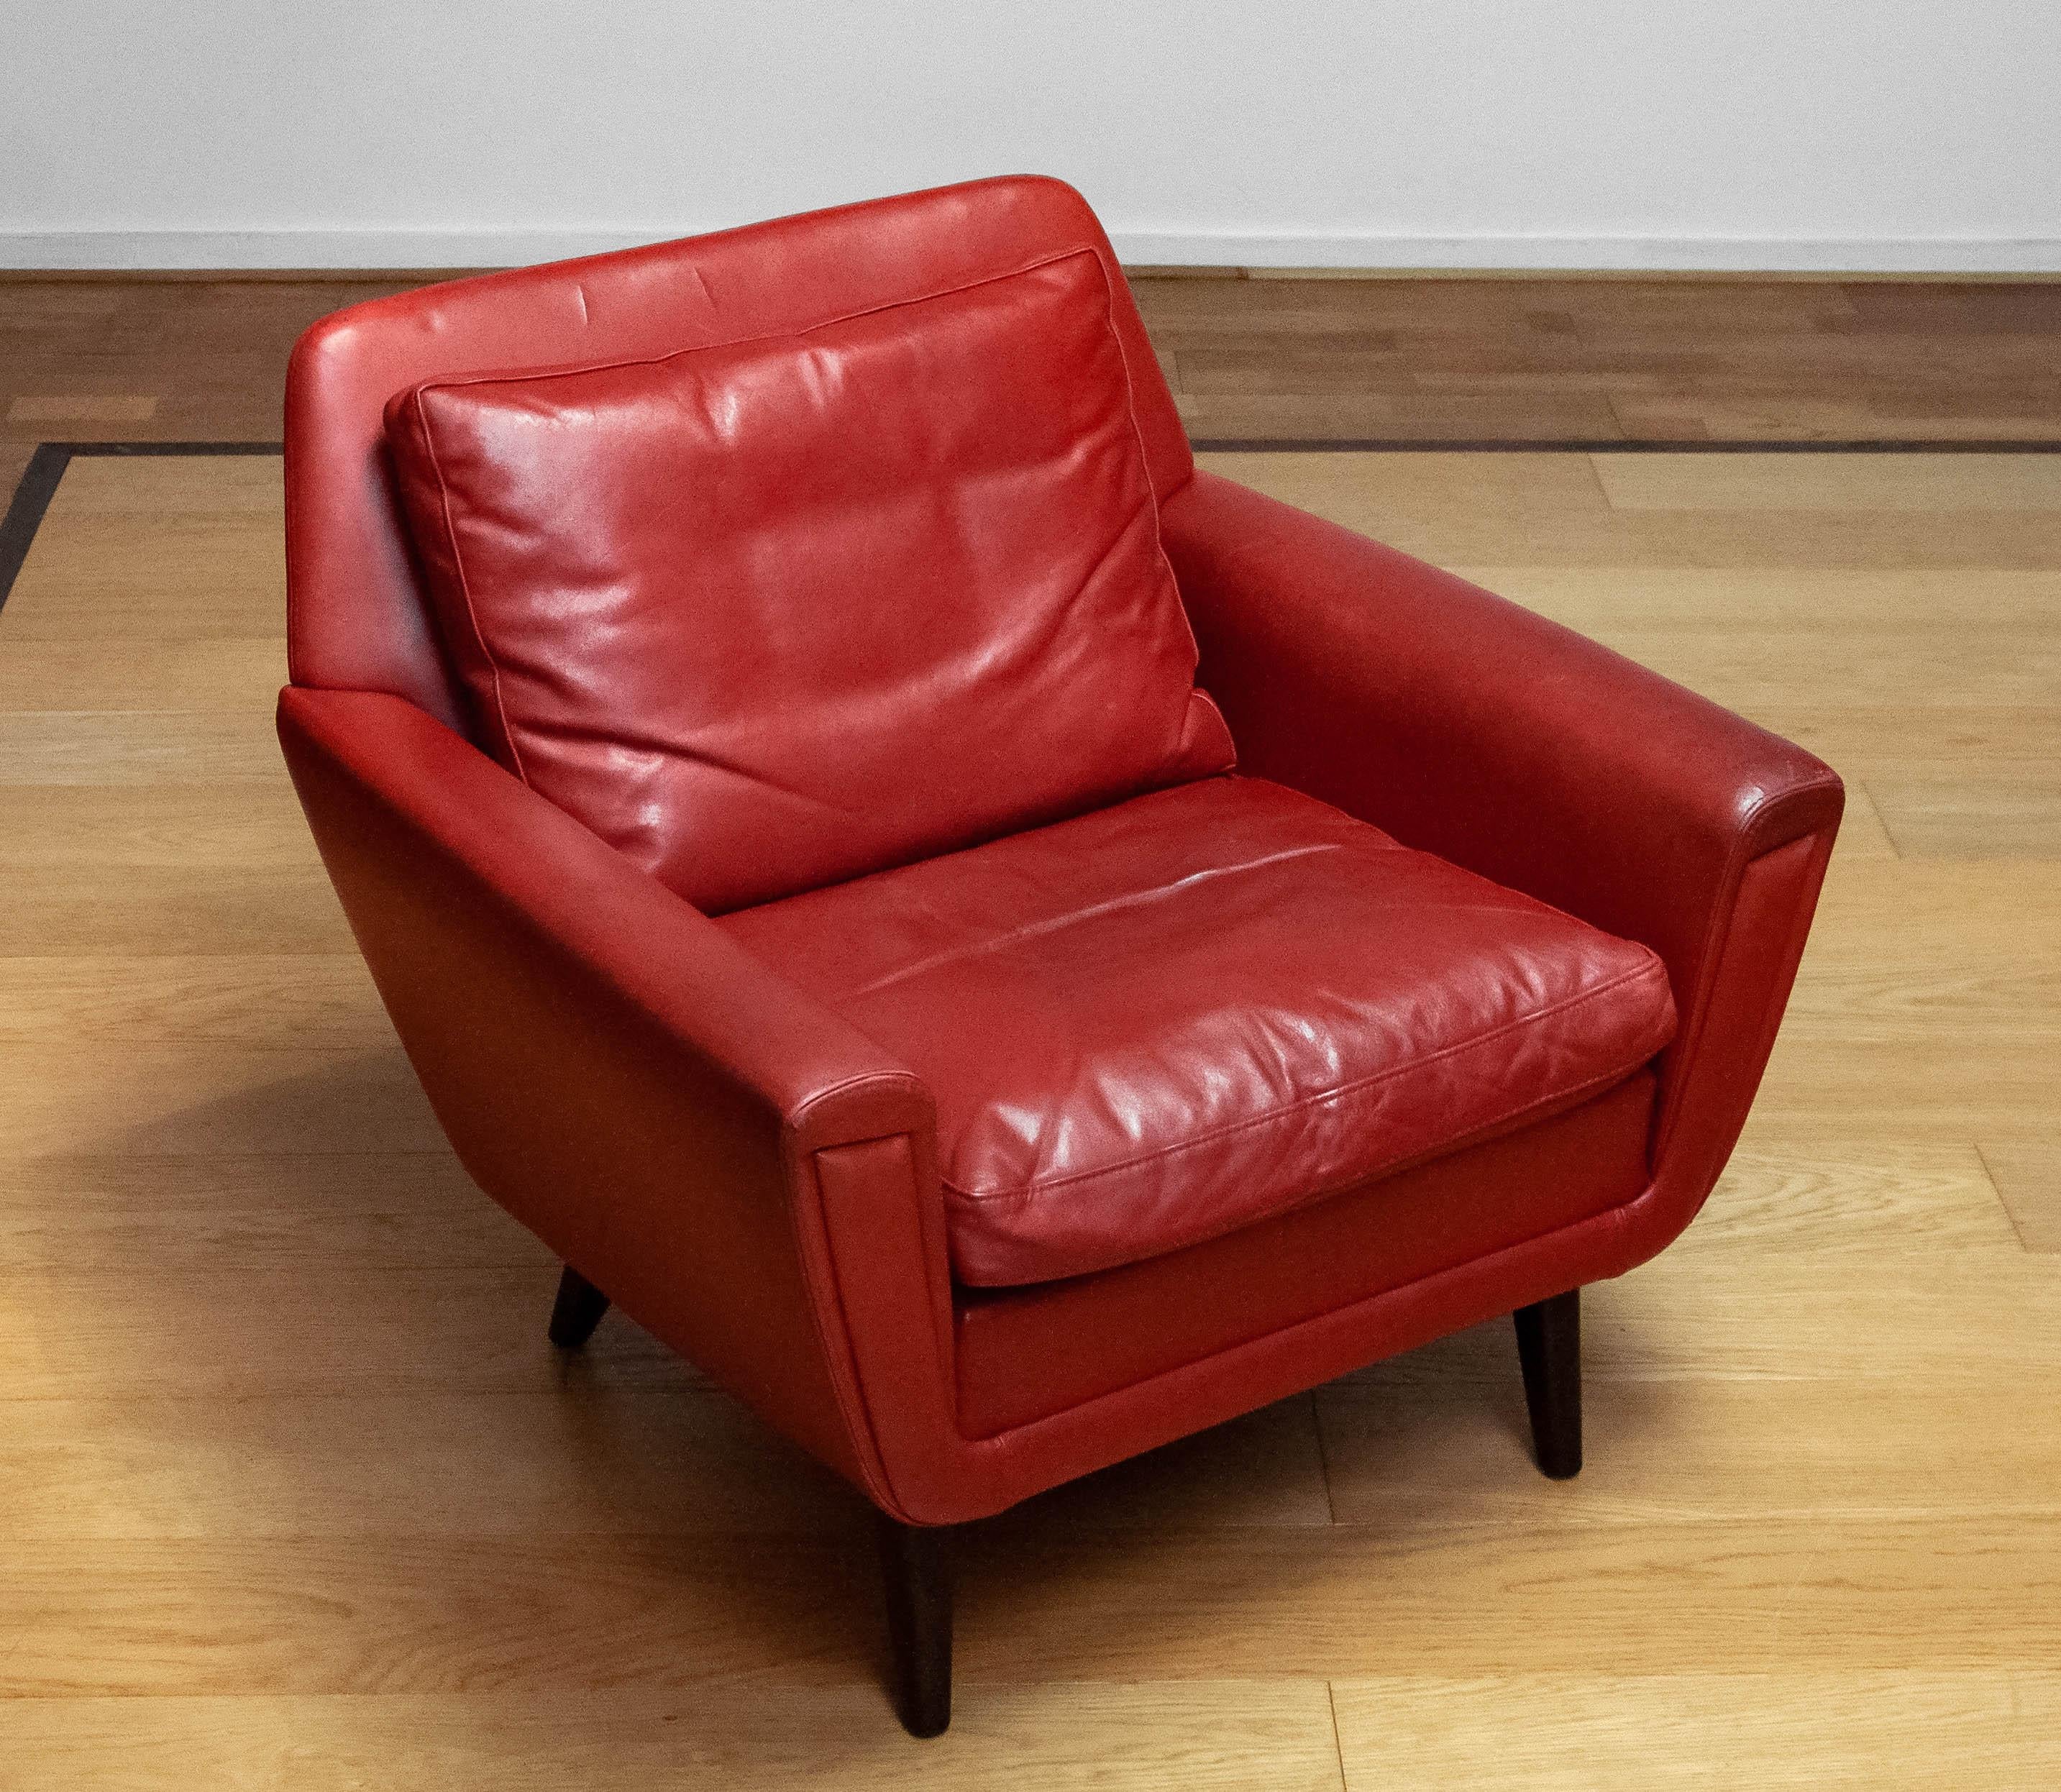 1960s Original Danish Lounge Easy Chair in Red Leather  In Fair Condition For Sale In Silvolde, Gelderland